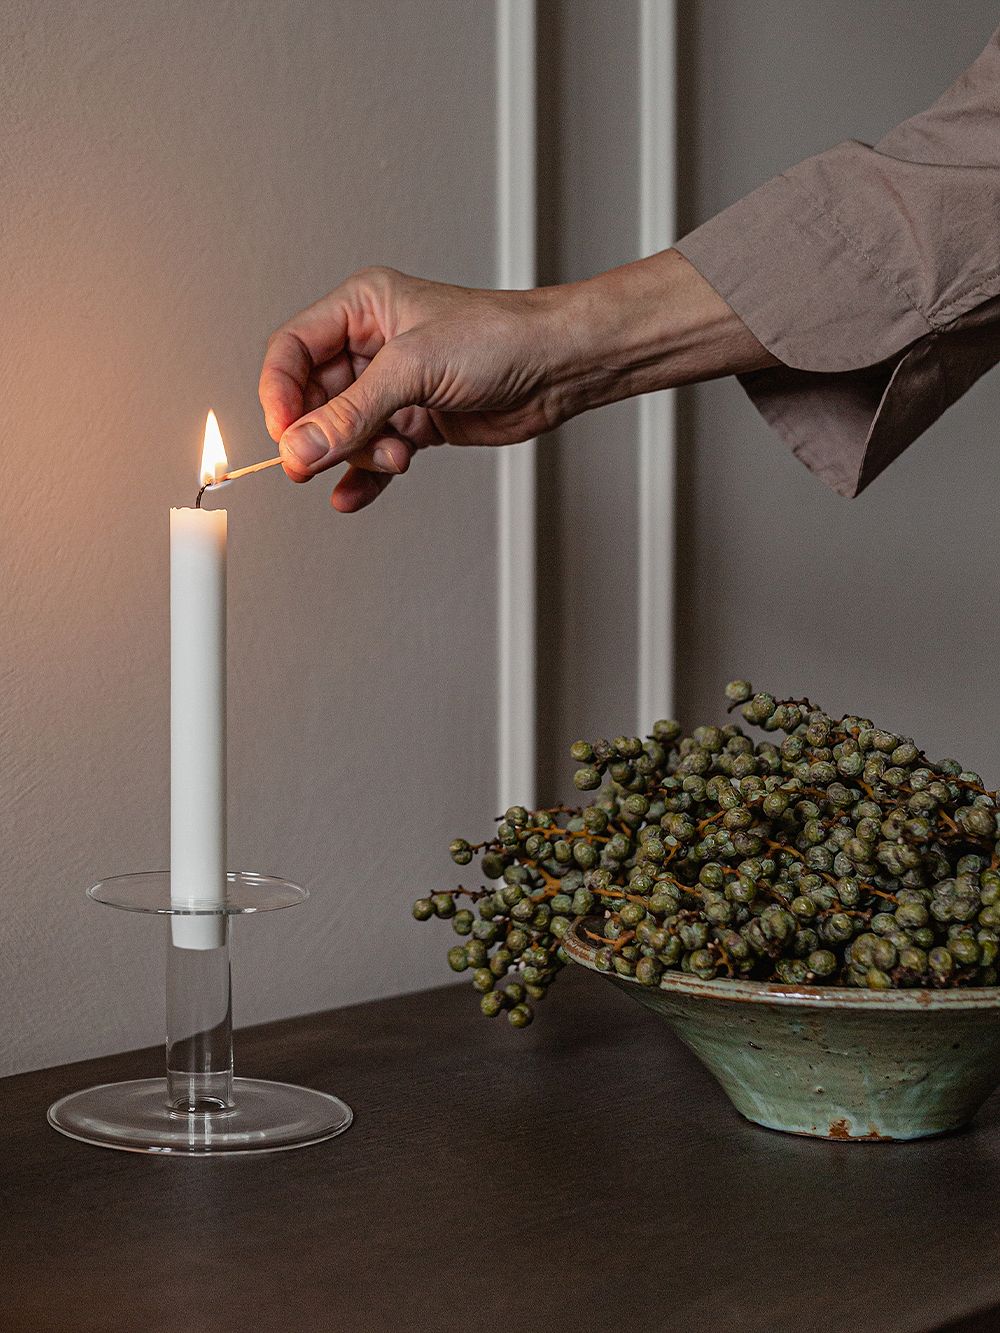 An image of Menu's Abacus candleholder and Triptych bowl on a table, as part of the living room or dining room decor.